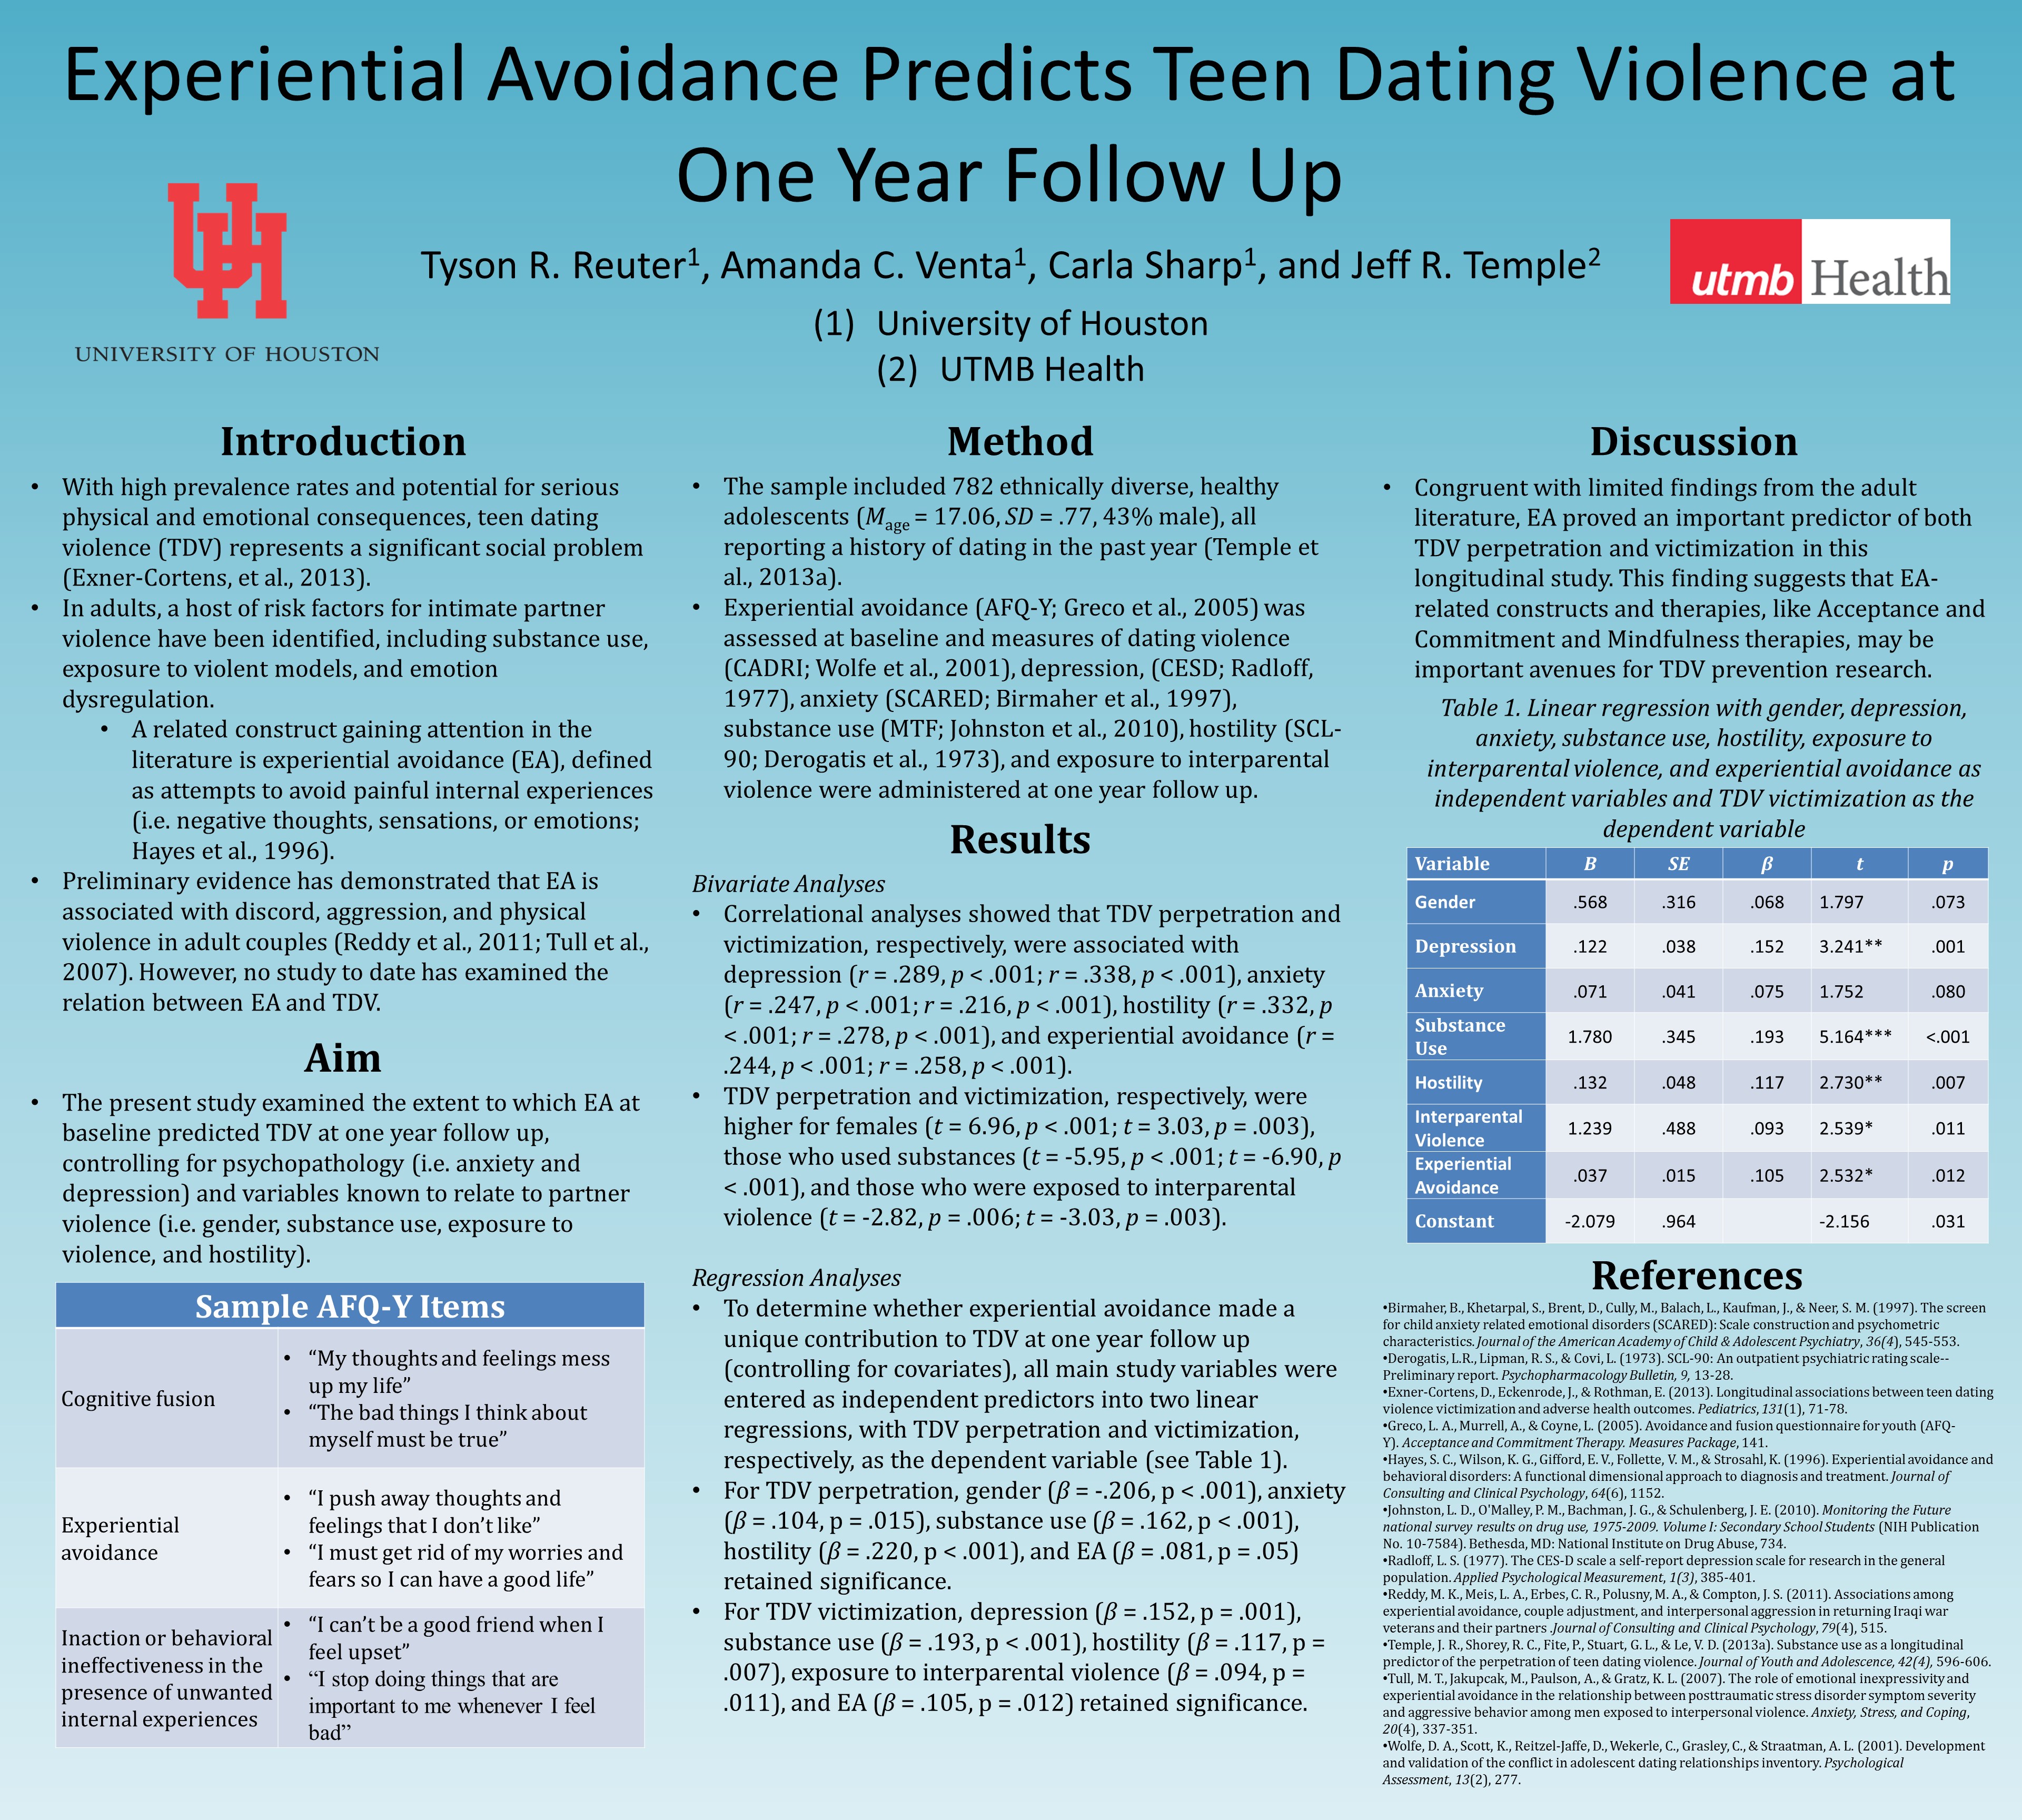 ABCT 2014_Experiential Avoidance Predicts Teen Dating Violence